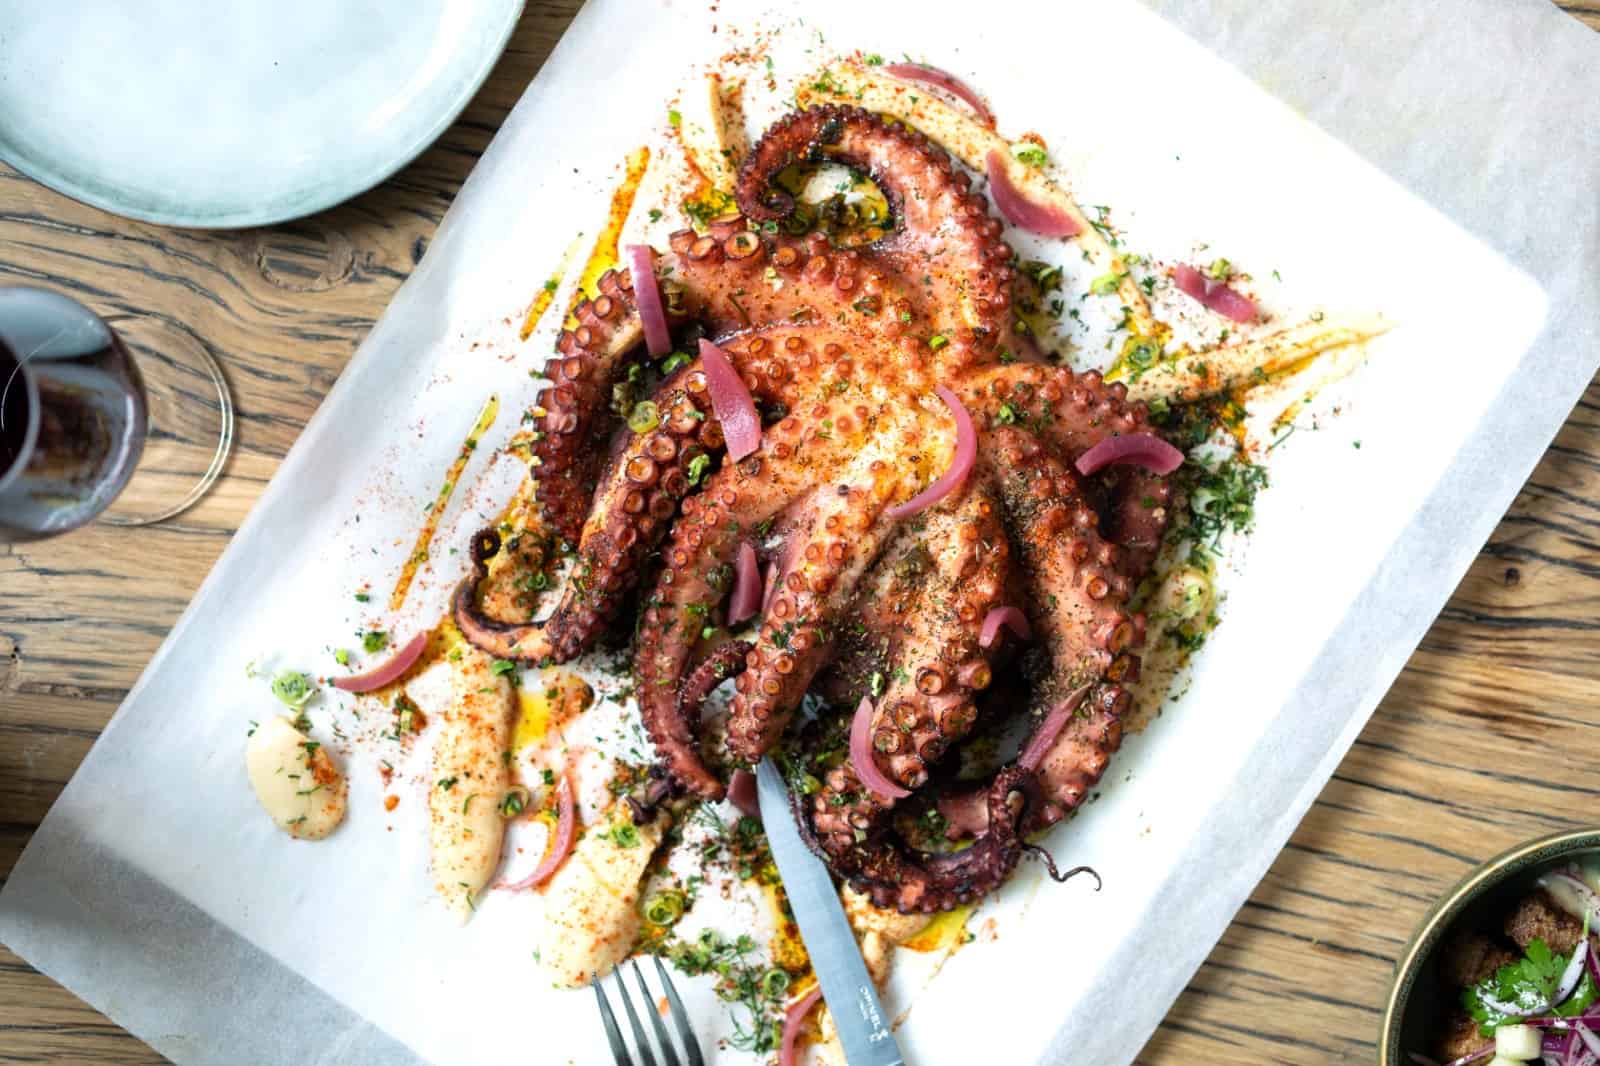 Delicious Greek octopus from Yaya restaurant, served only in the fall and winter.